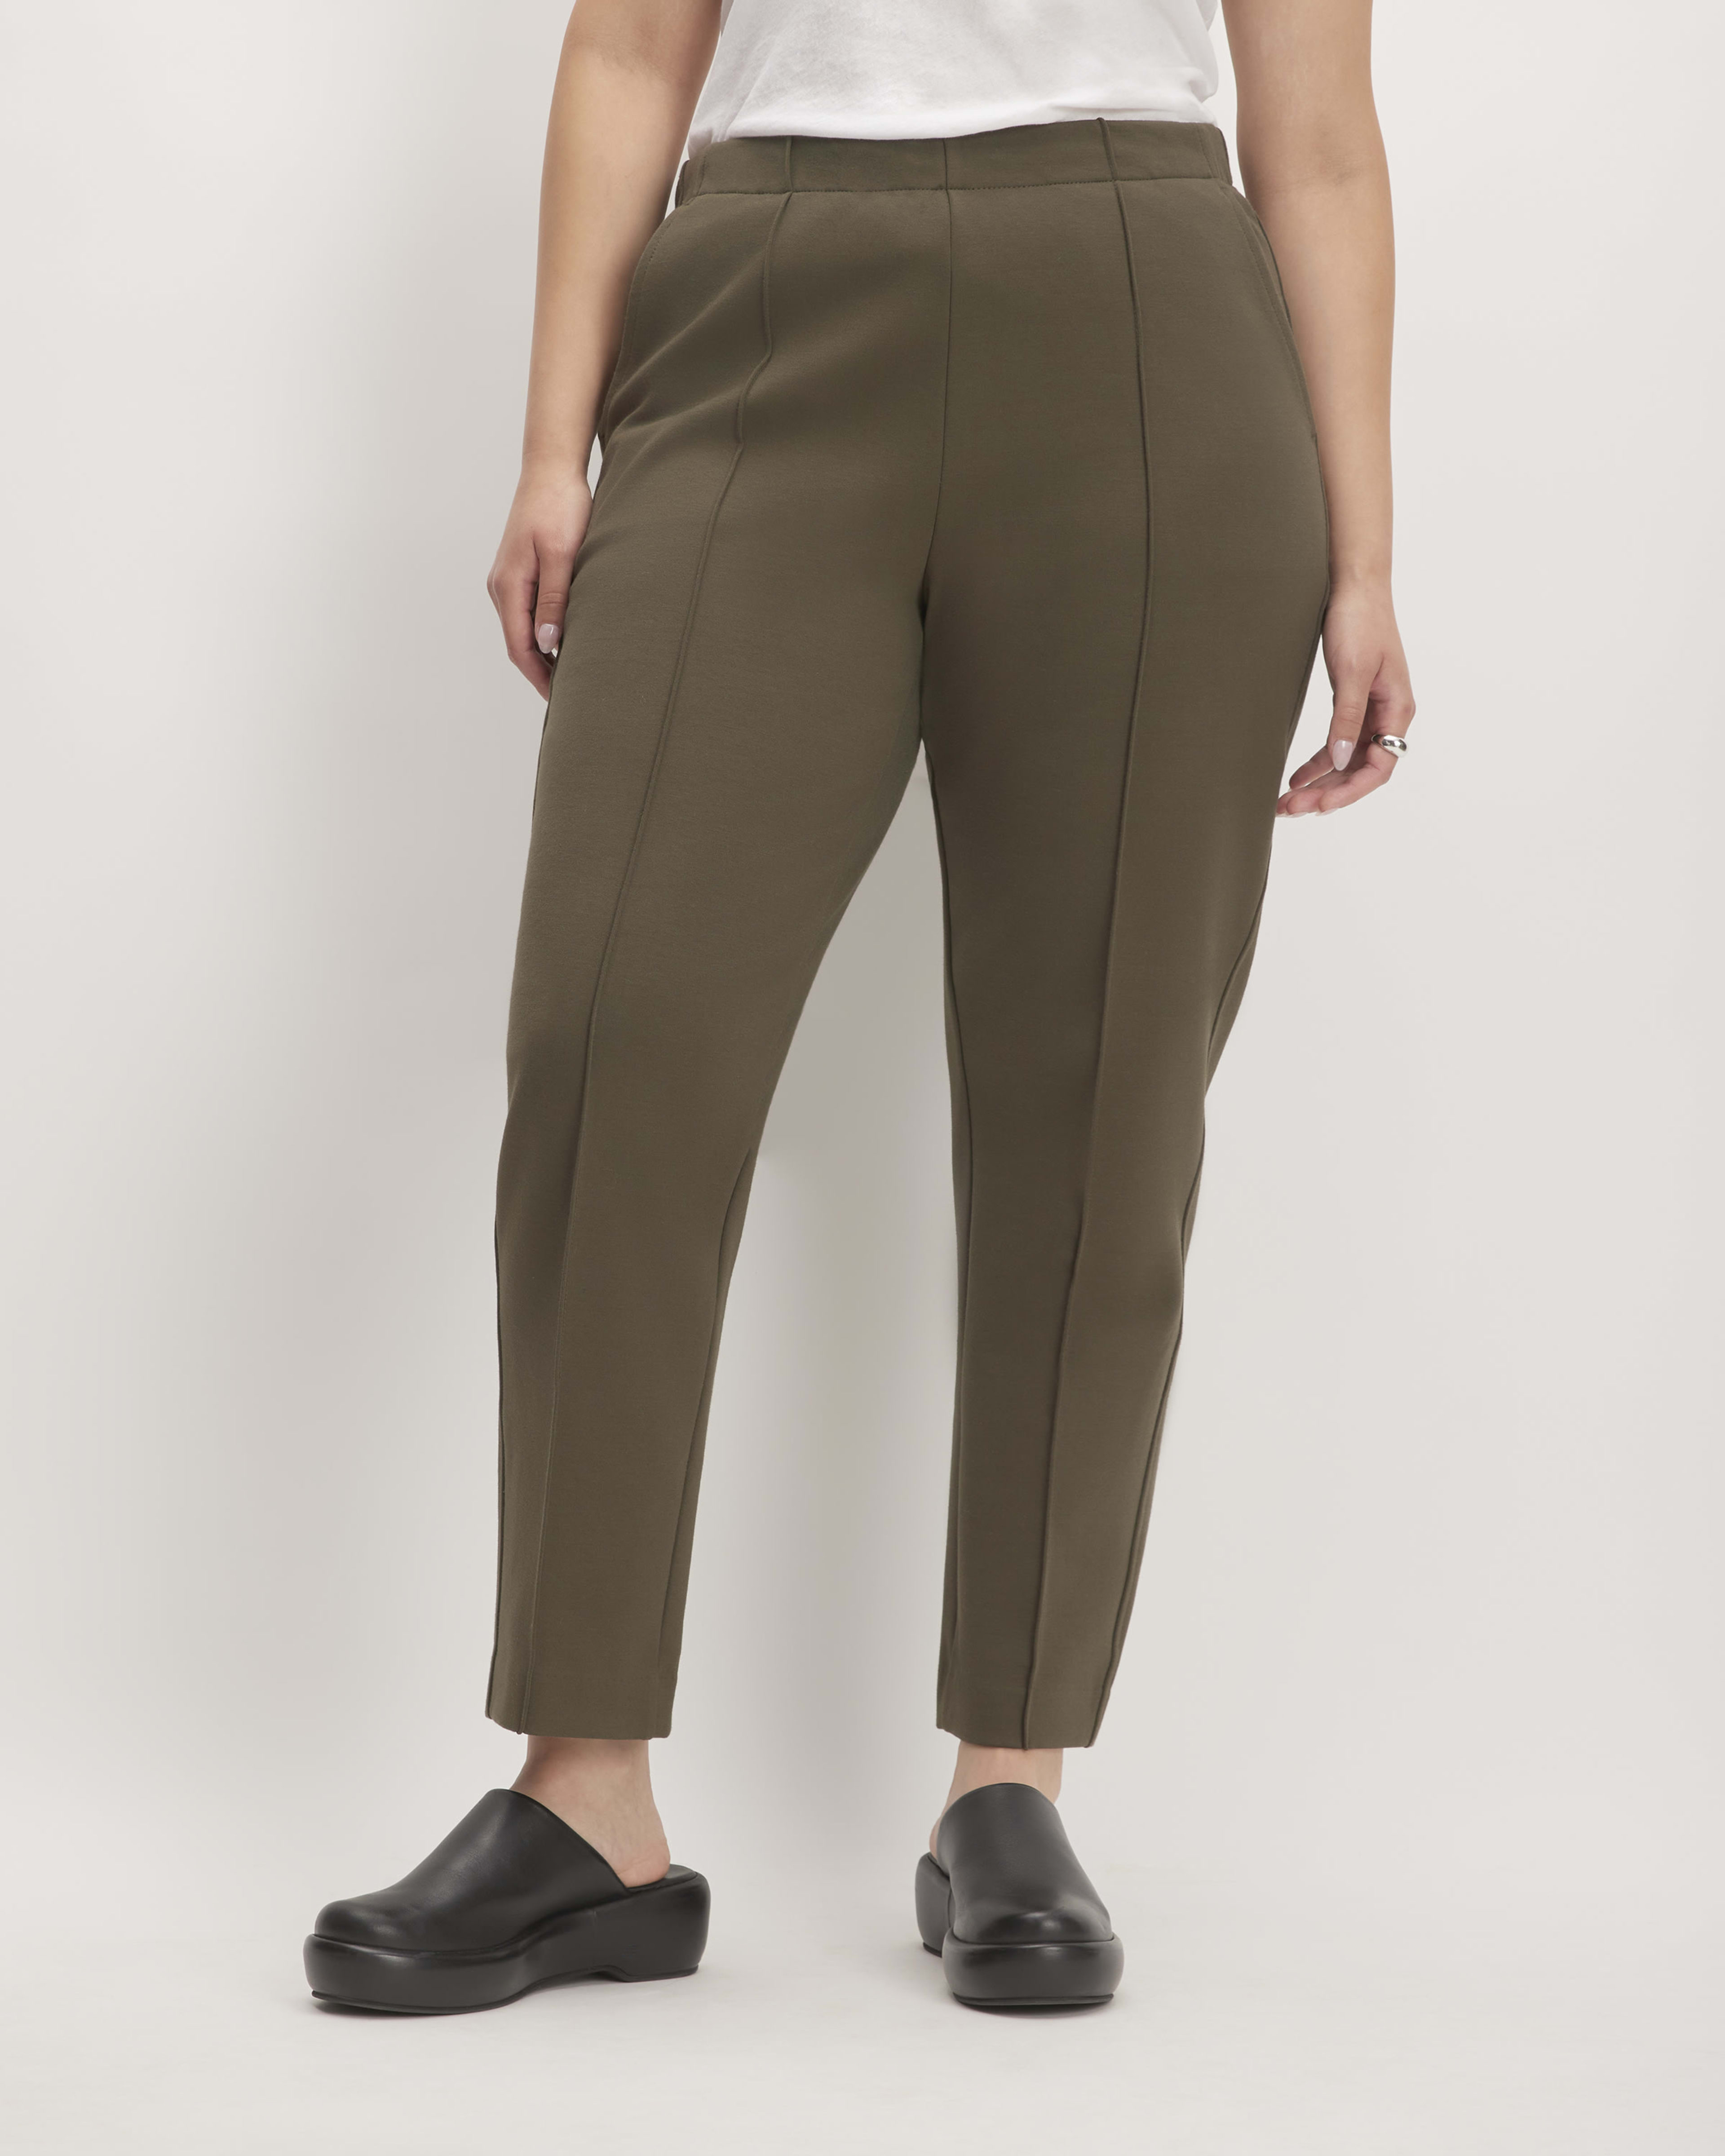 Everlane Review Stretch Ponte Pants — Fairly Curated